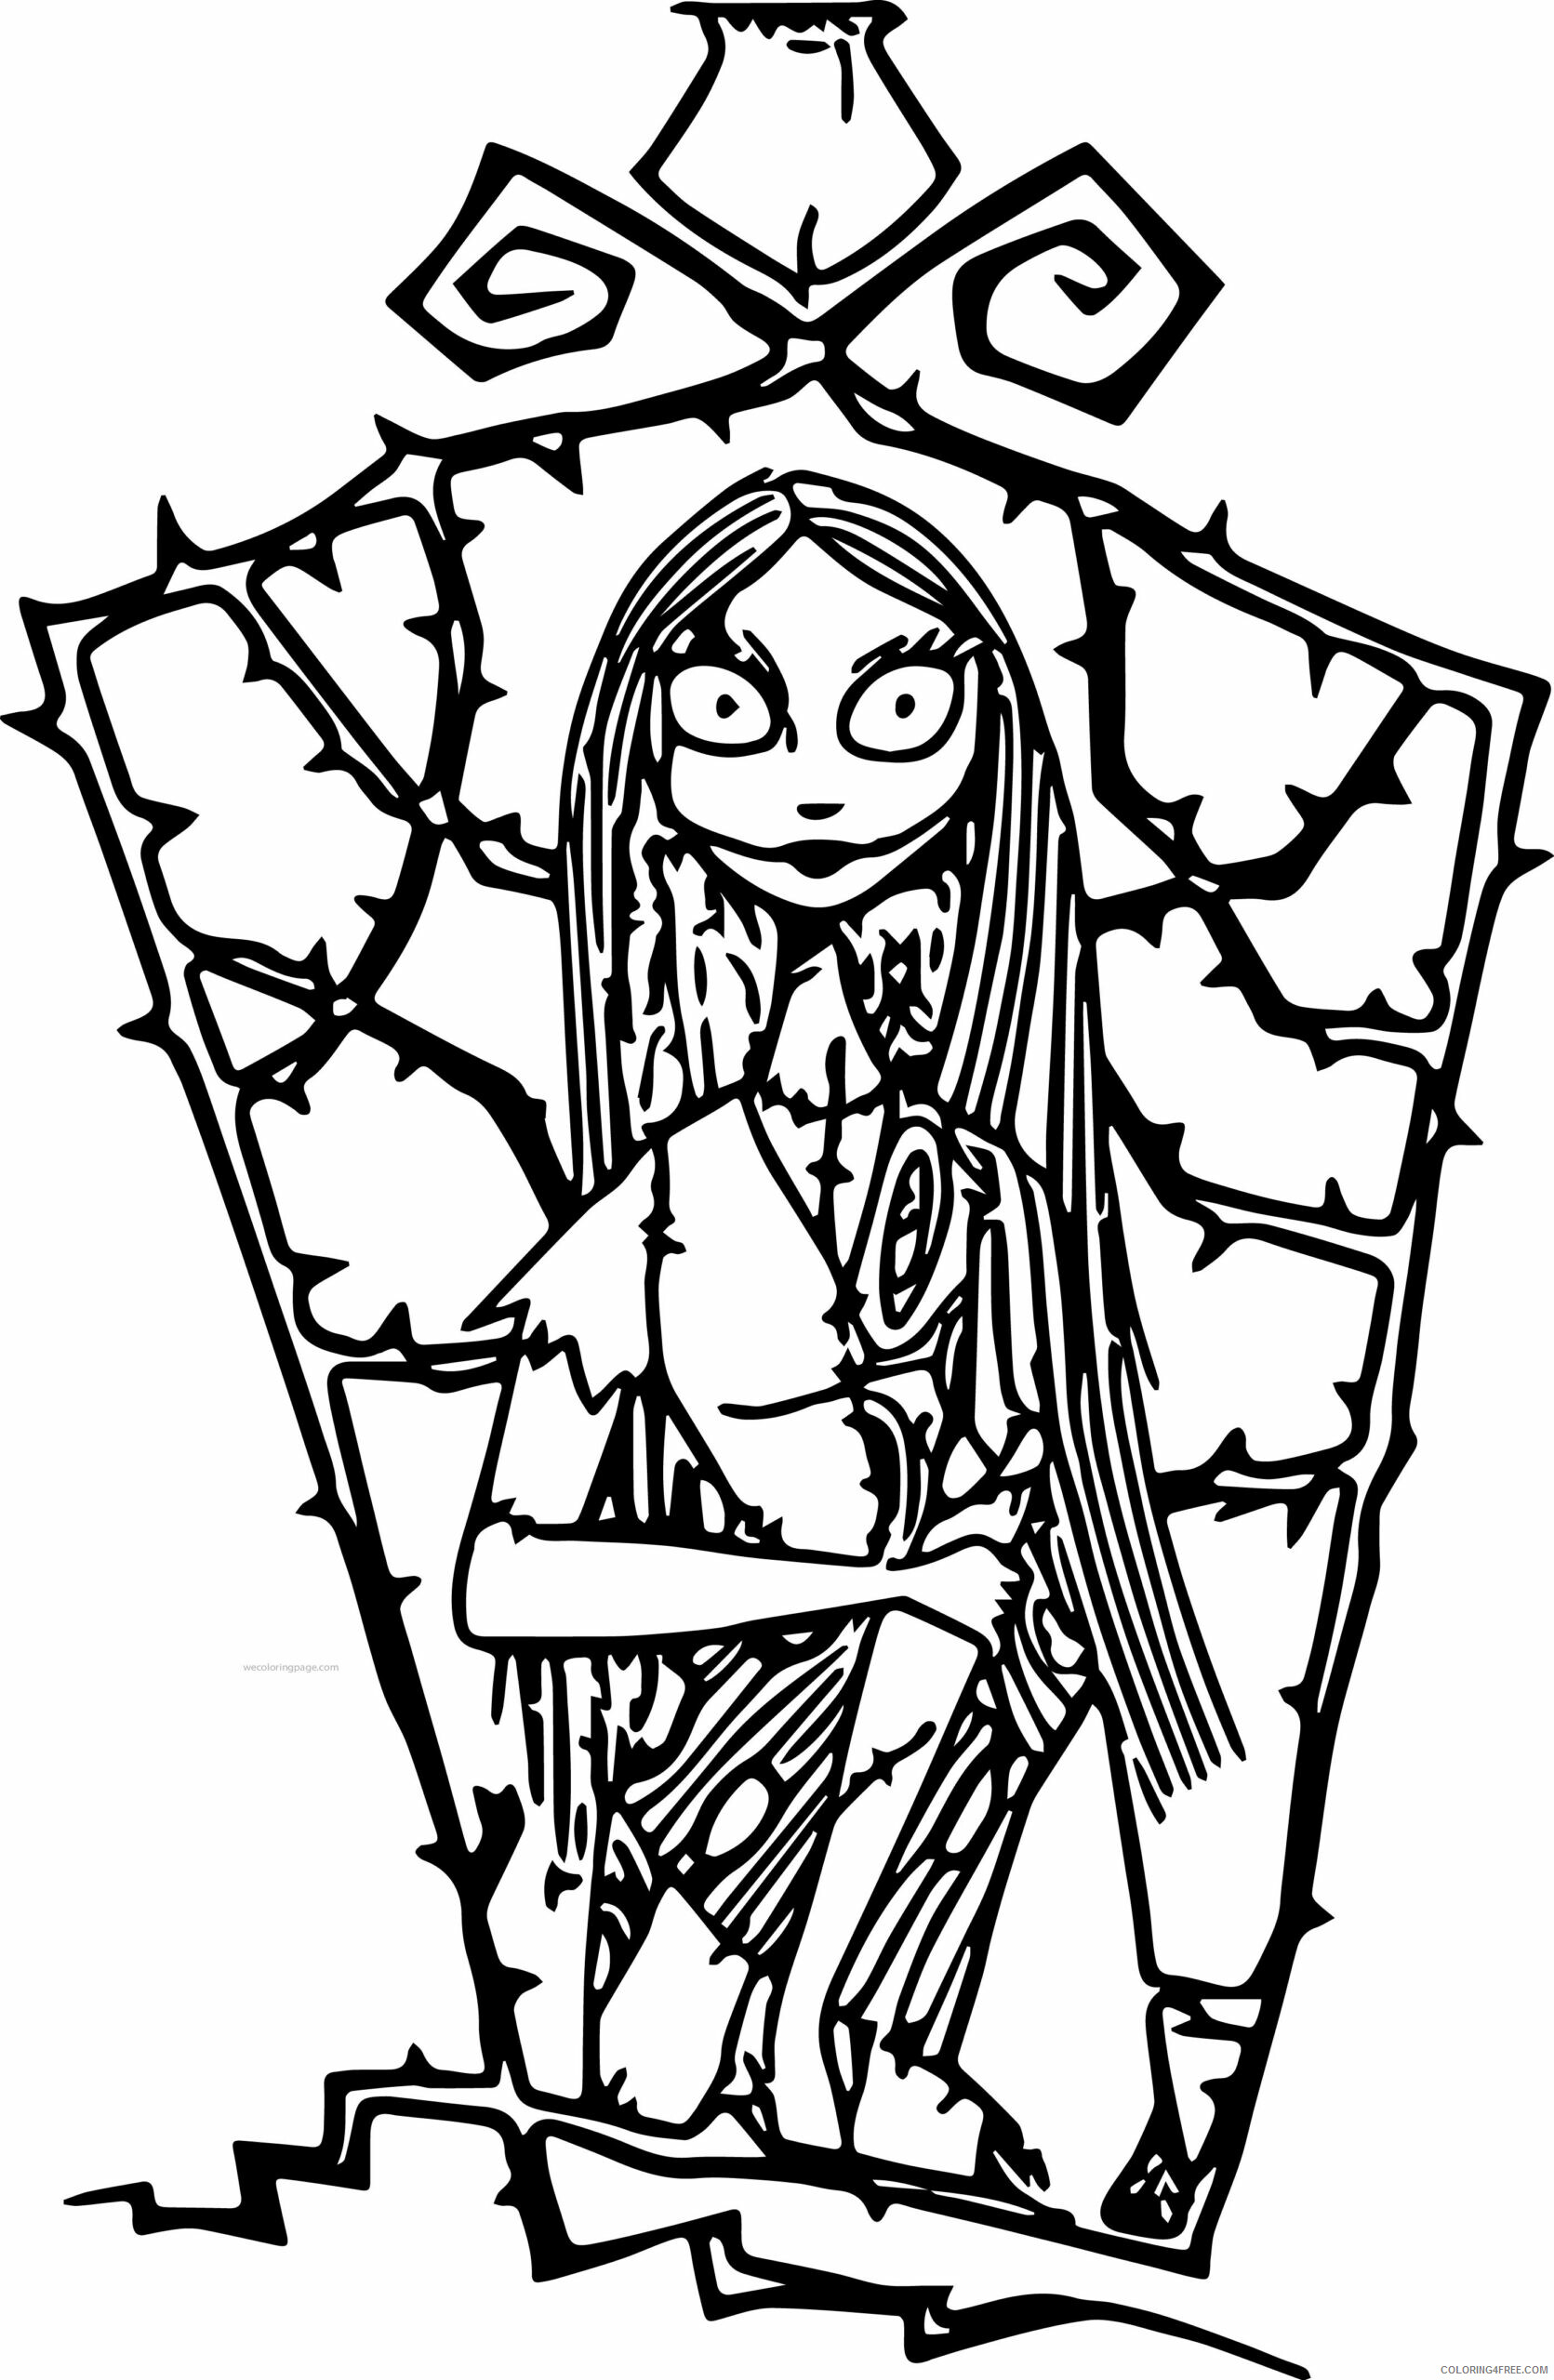 Nightmare Before Christmas Coloring Pages TV Film images Printable 2020 05435 Coloring4free